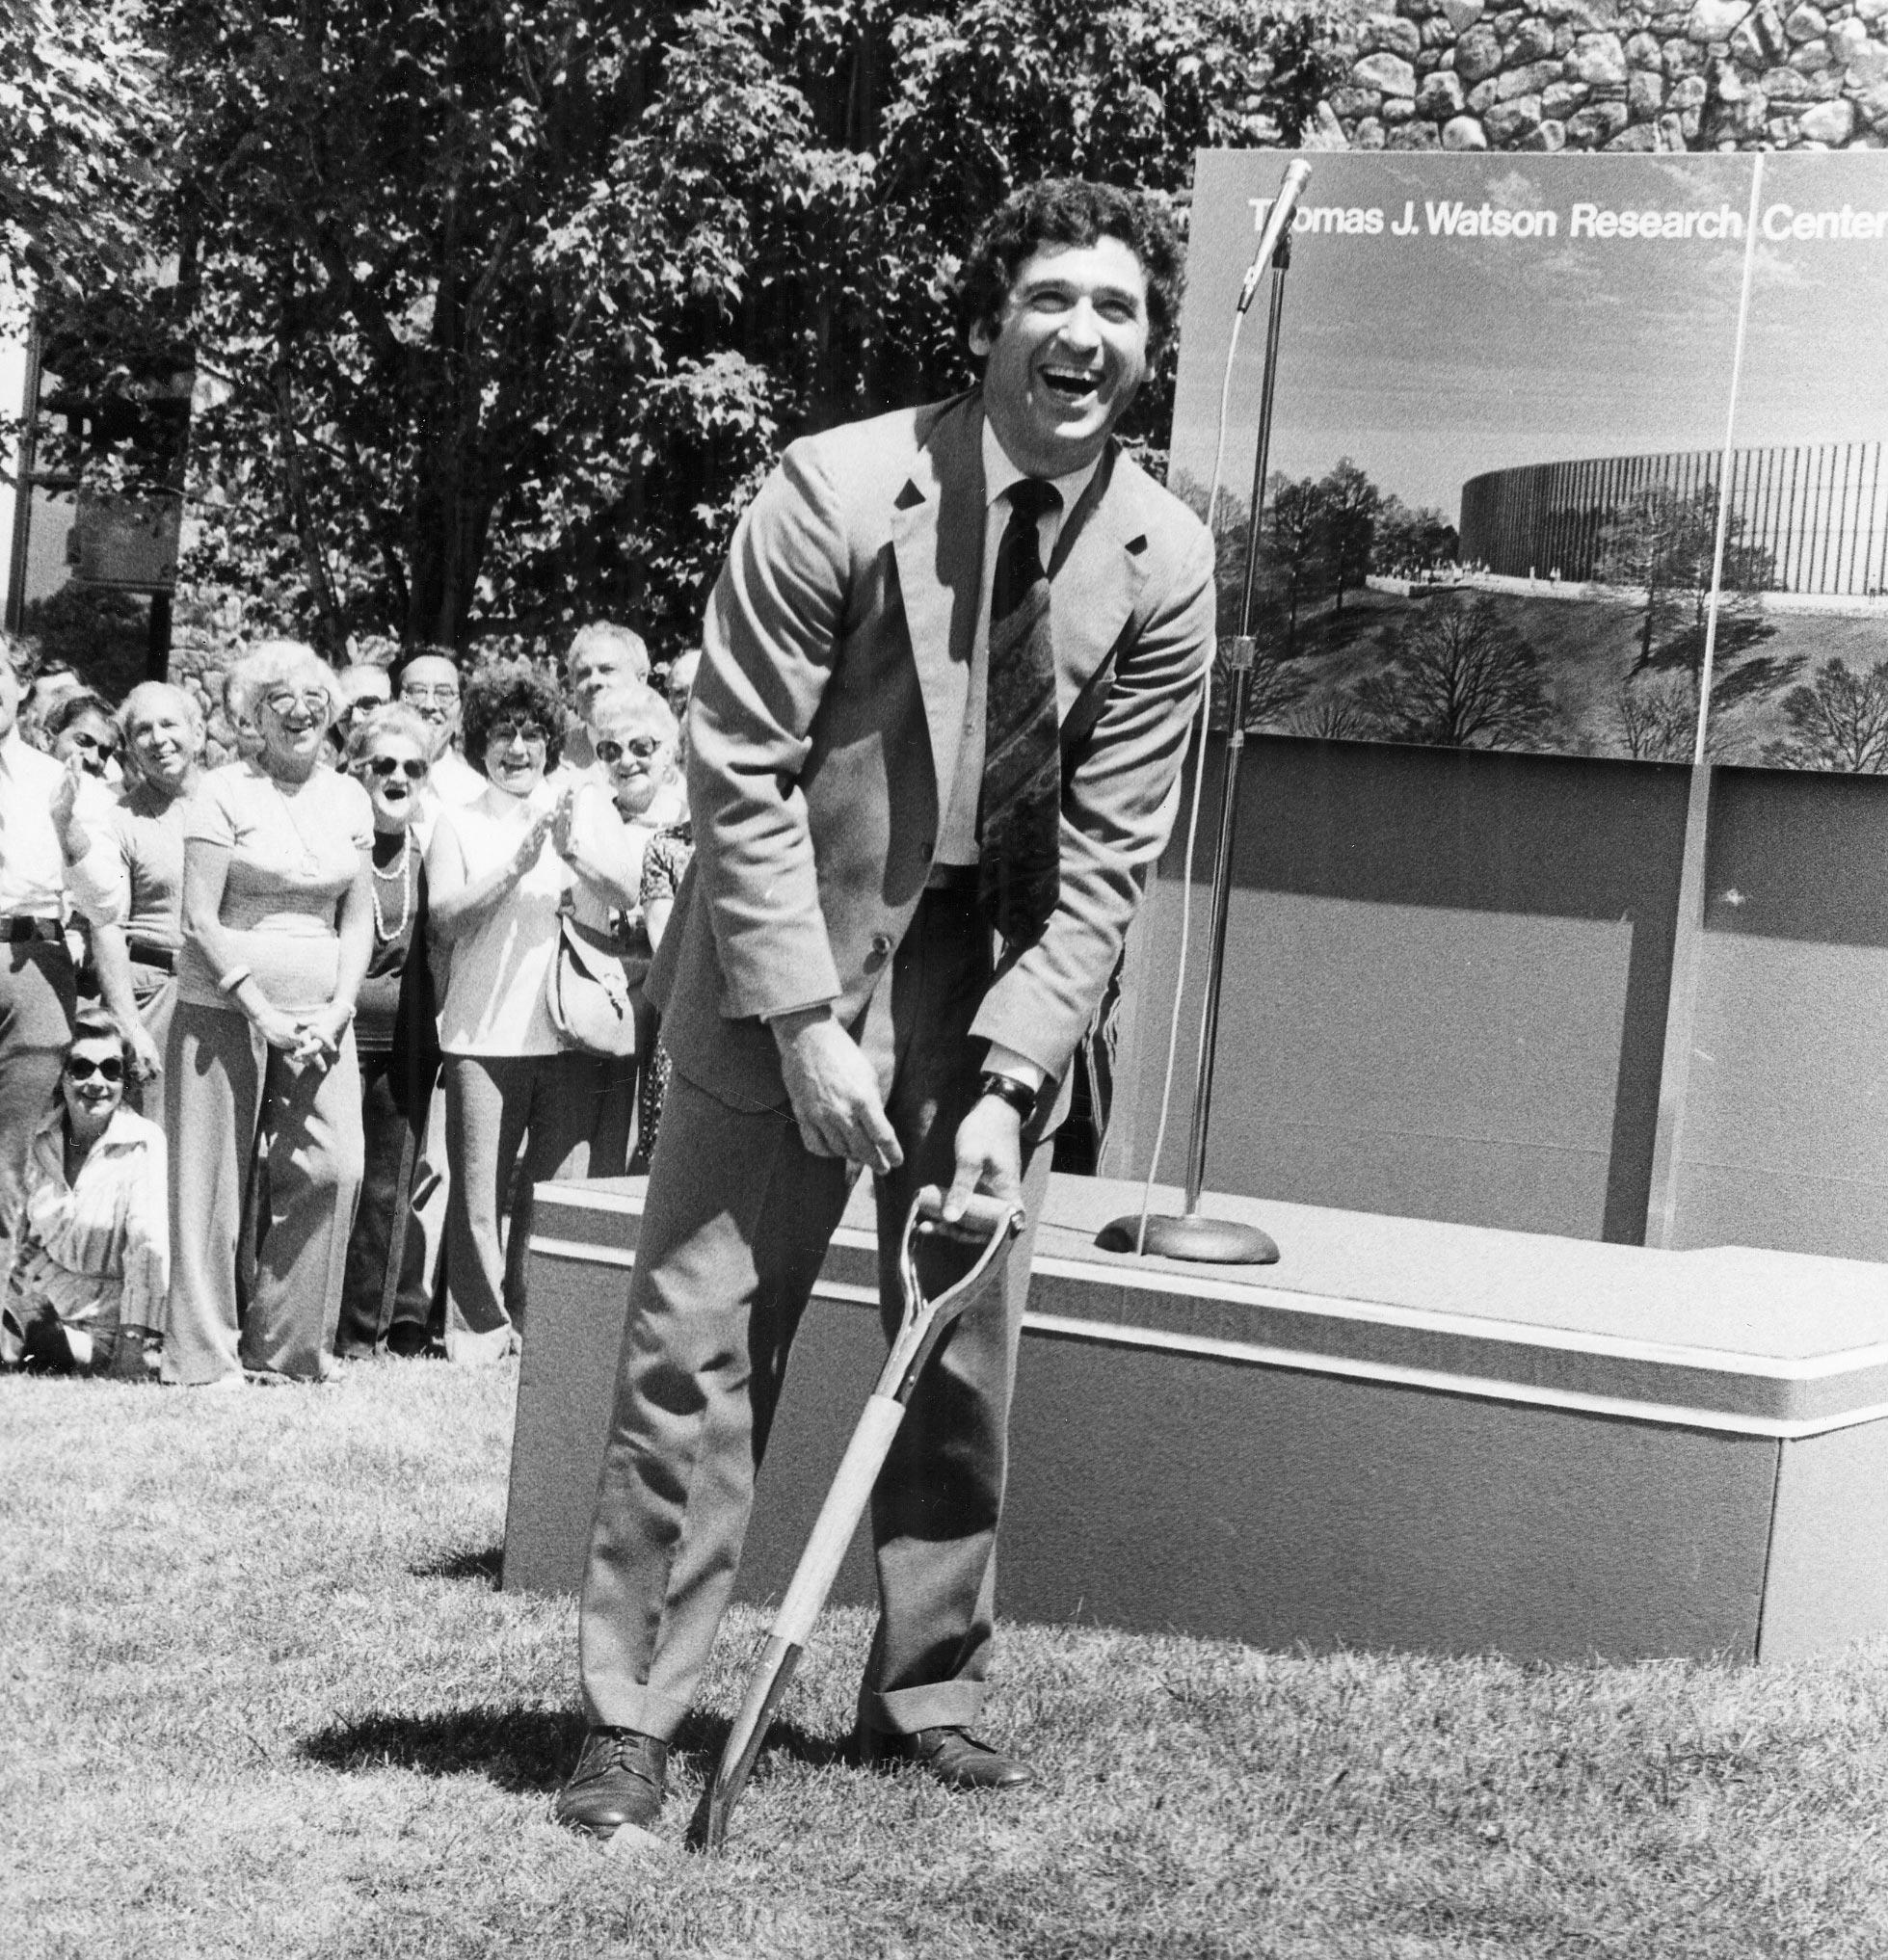 Director of IBM Research Ralph Gomory at the ground-breaking ceremony for the 1979 addition to the Thomas J. Watson Research Center. (Credit: IBM Archives)